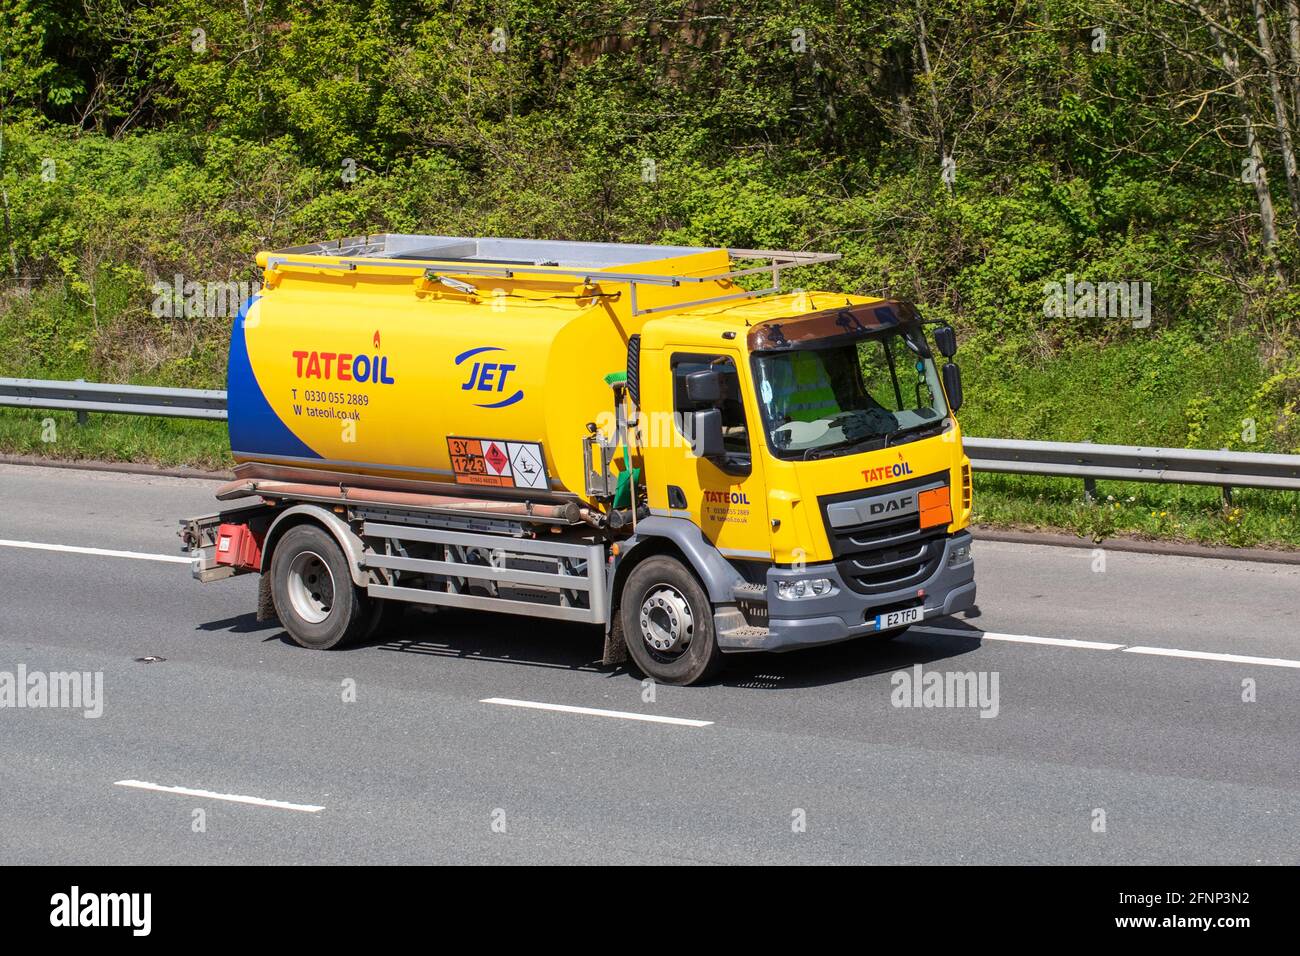 TATEOIL JET fuels tanker. 2021 Yellow Scania 9320 B 6x2*4 Diesel truck. TateOil Fuel Tanker; Bulk Haulage delivery trucks, haulage, lorry, transportation, truck, cargo, vehicle, domestic or commercial fuel delivery, transport industry, tank truck, gas truck, Tate oil Jet fuel truck, or tanker truck on the M6 at Lancaster, UK Stock Photo